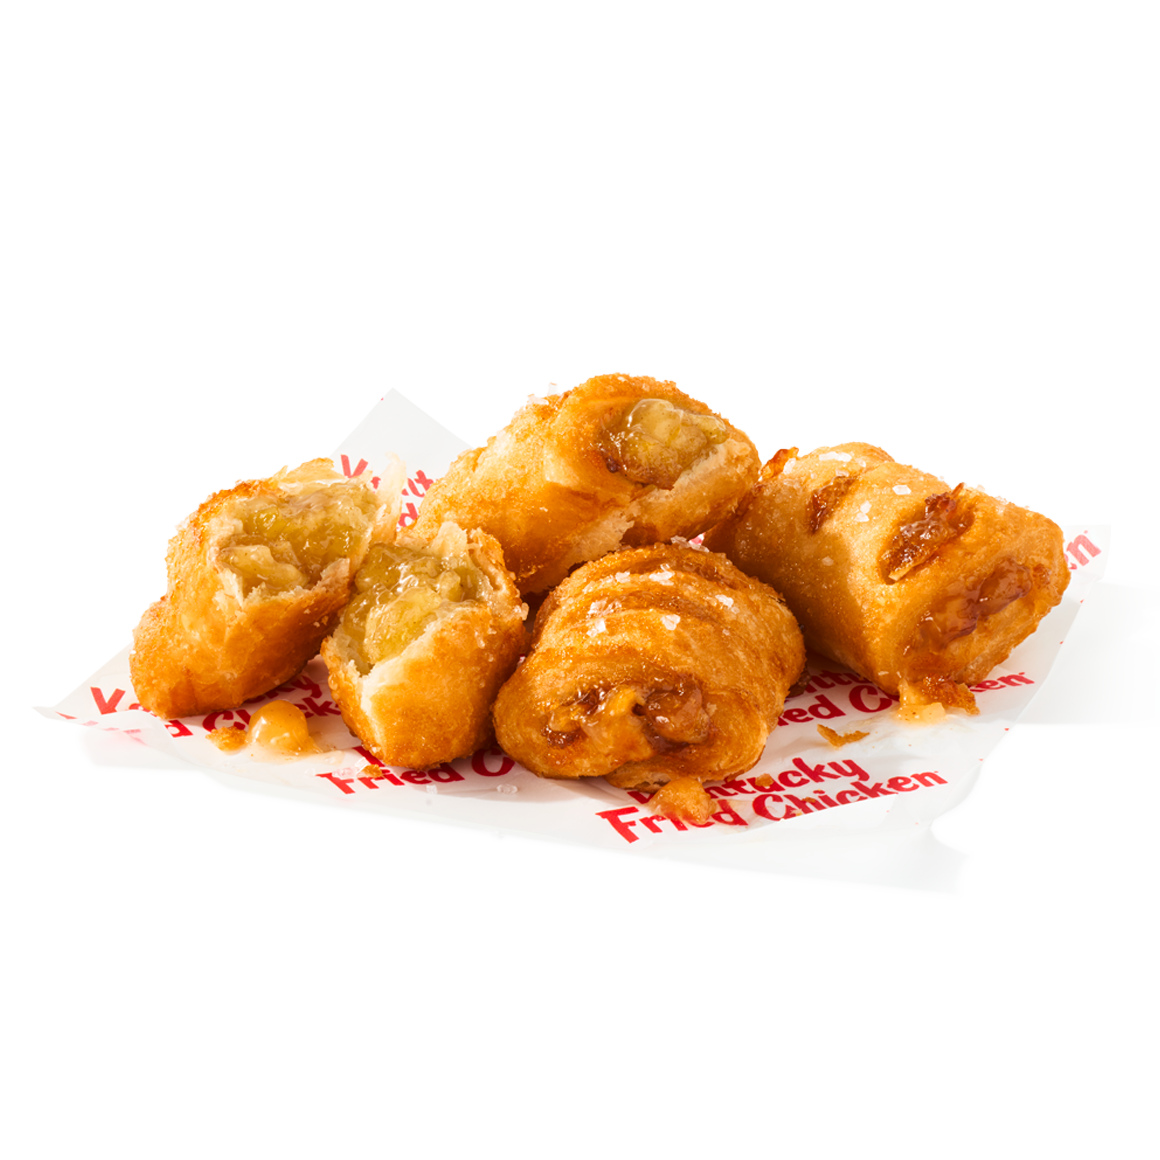 kfc-4pcPiePoppers.png